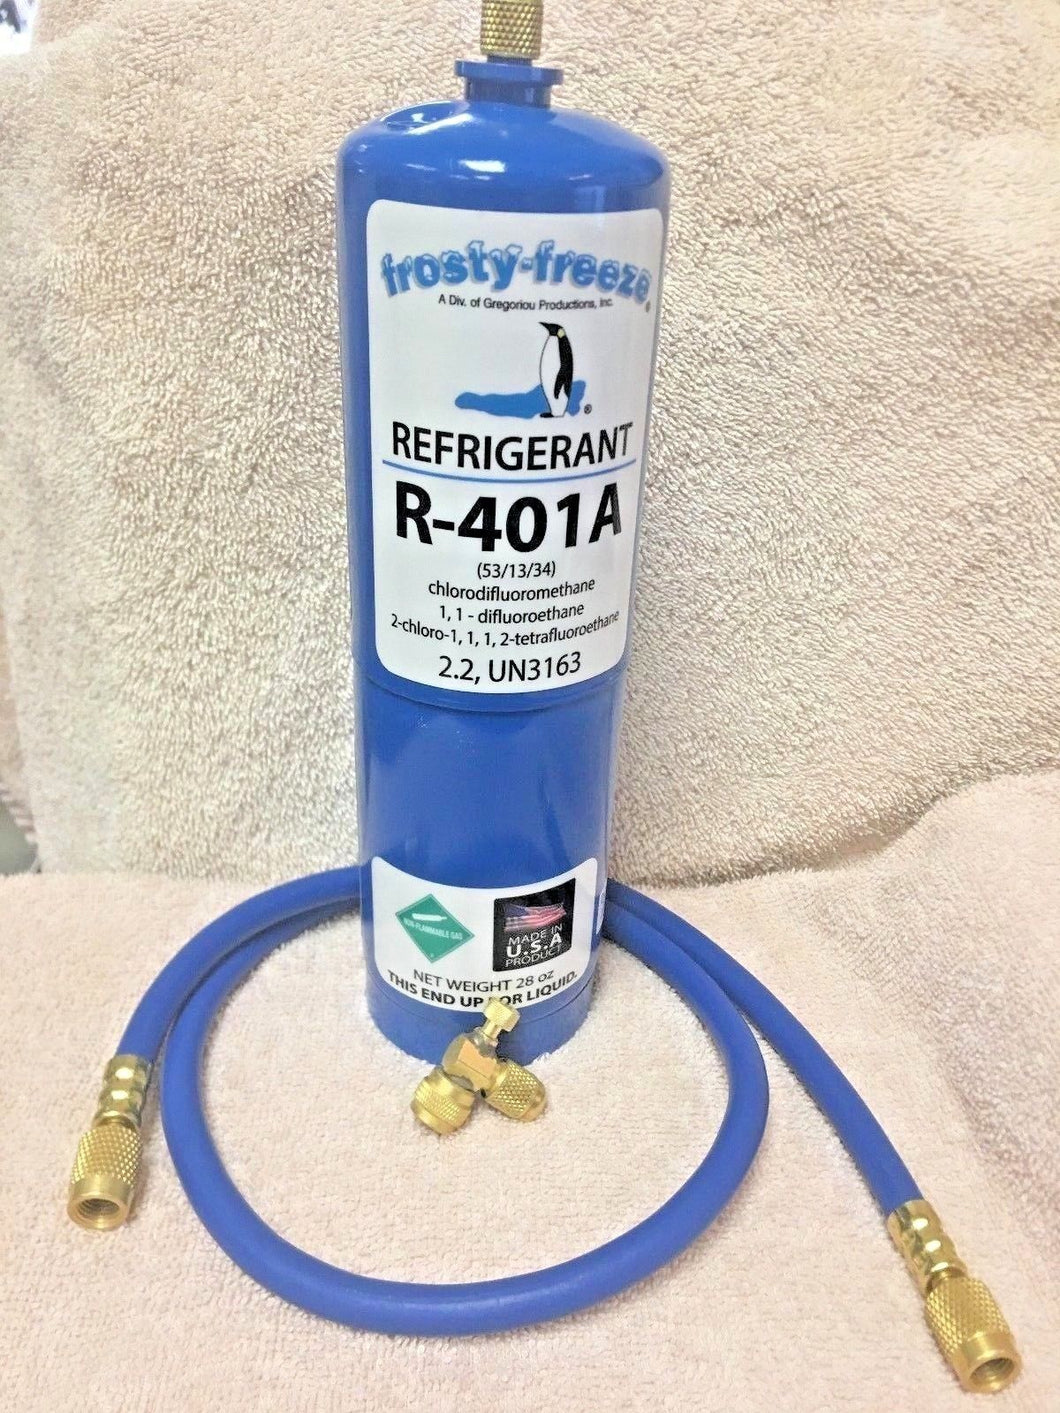 MP39, R401a, Refrigerant Coolers, Freezers, 28 oz Disposable, On/Off Valve, Hose